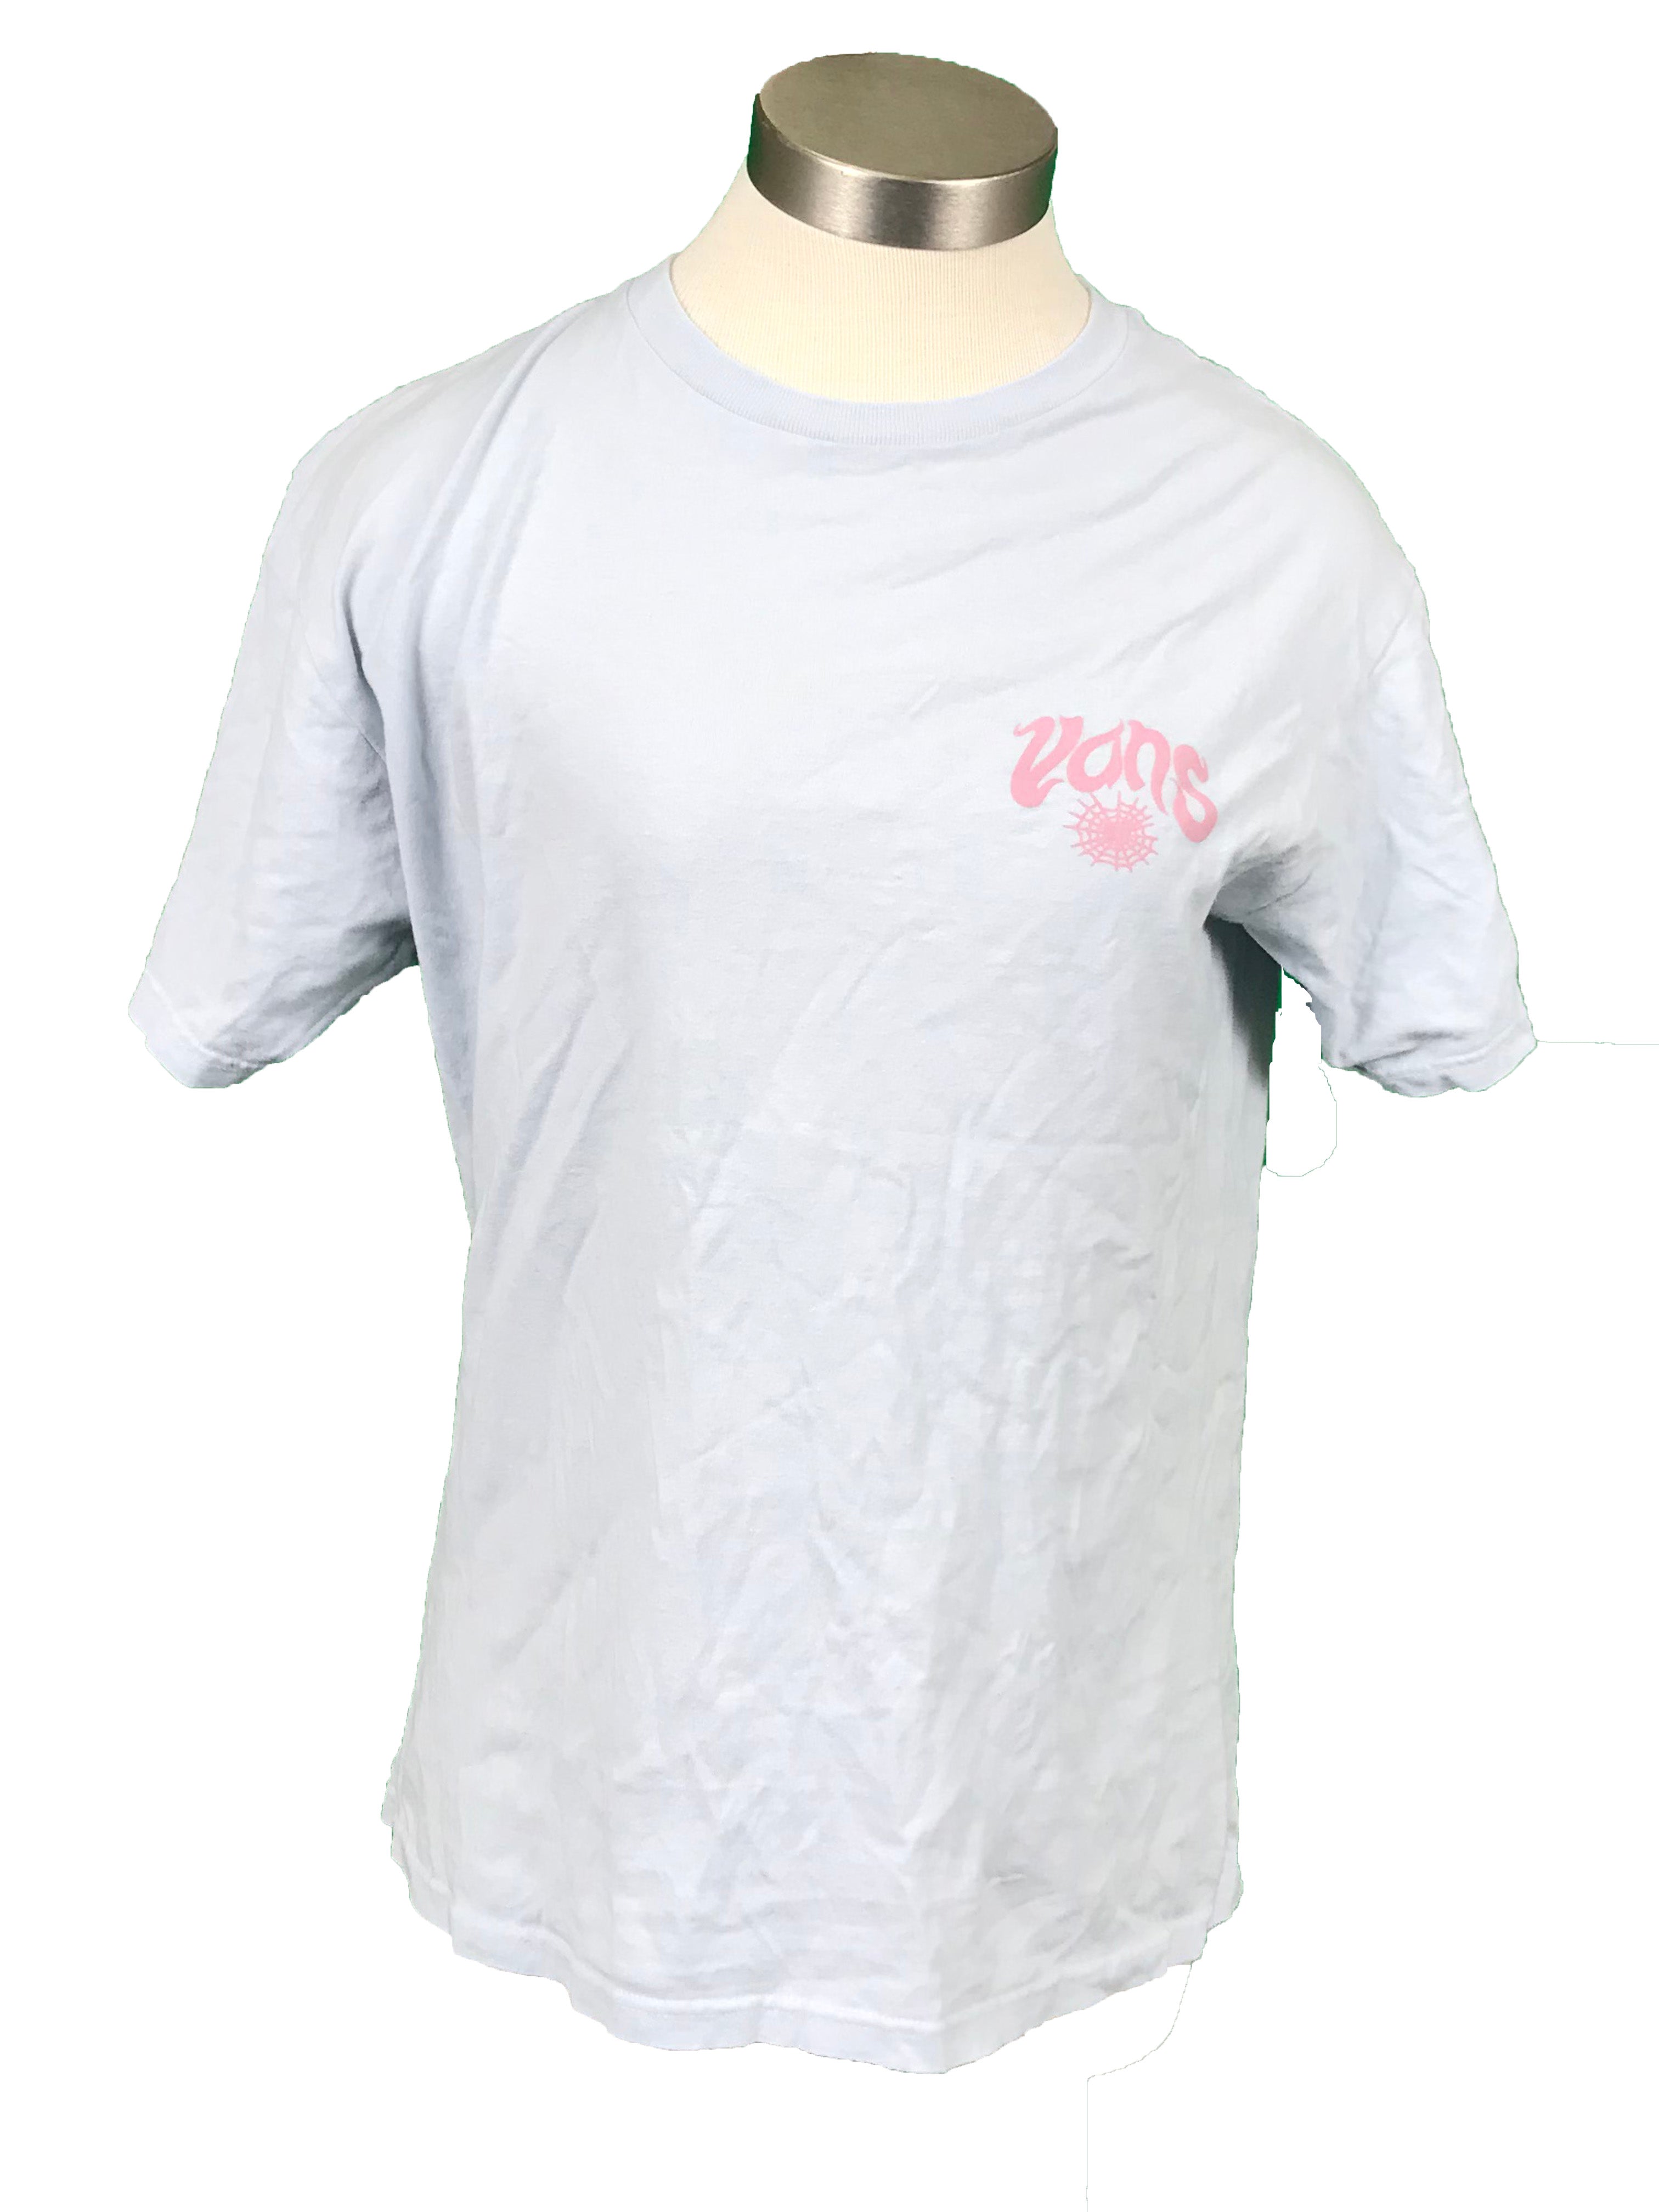 Off The Wall Classic Fit and Pink T-Shirt Unisex Size M – Surplus Store